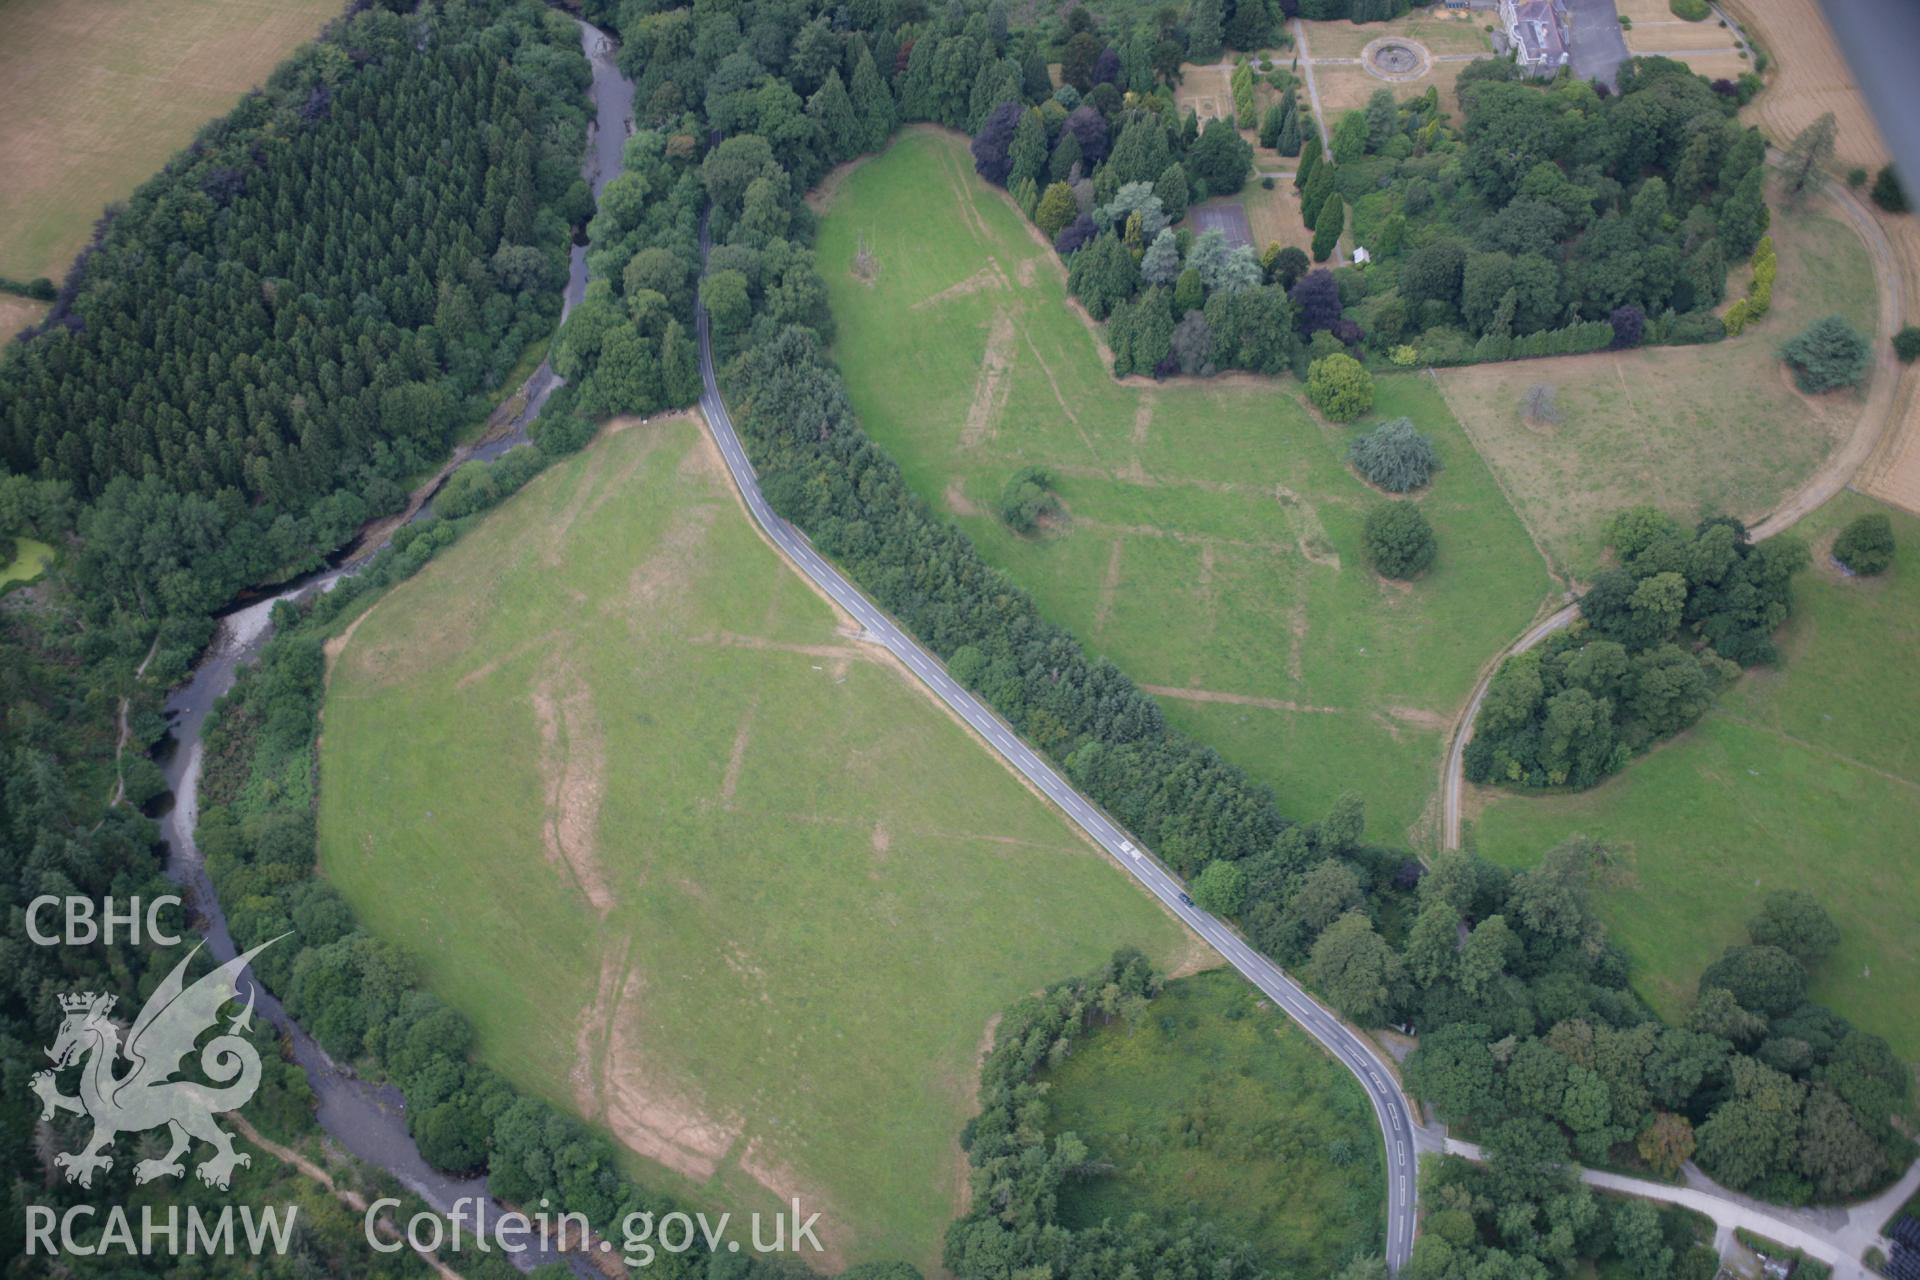 RCAHMW colour oblique aerial photograph of Trawsgoed Roman Fort. Taken on 27 July 2006 by Toby Driver.